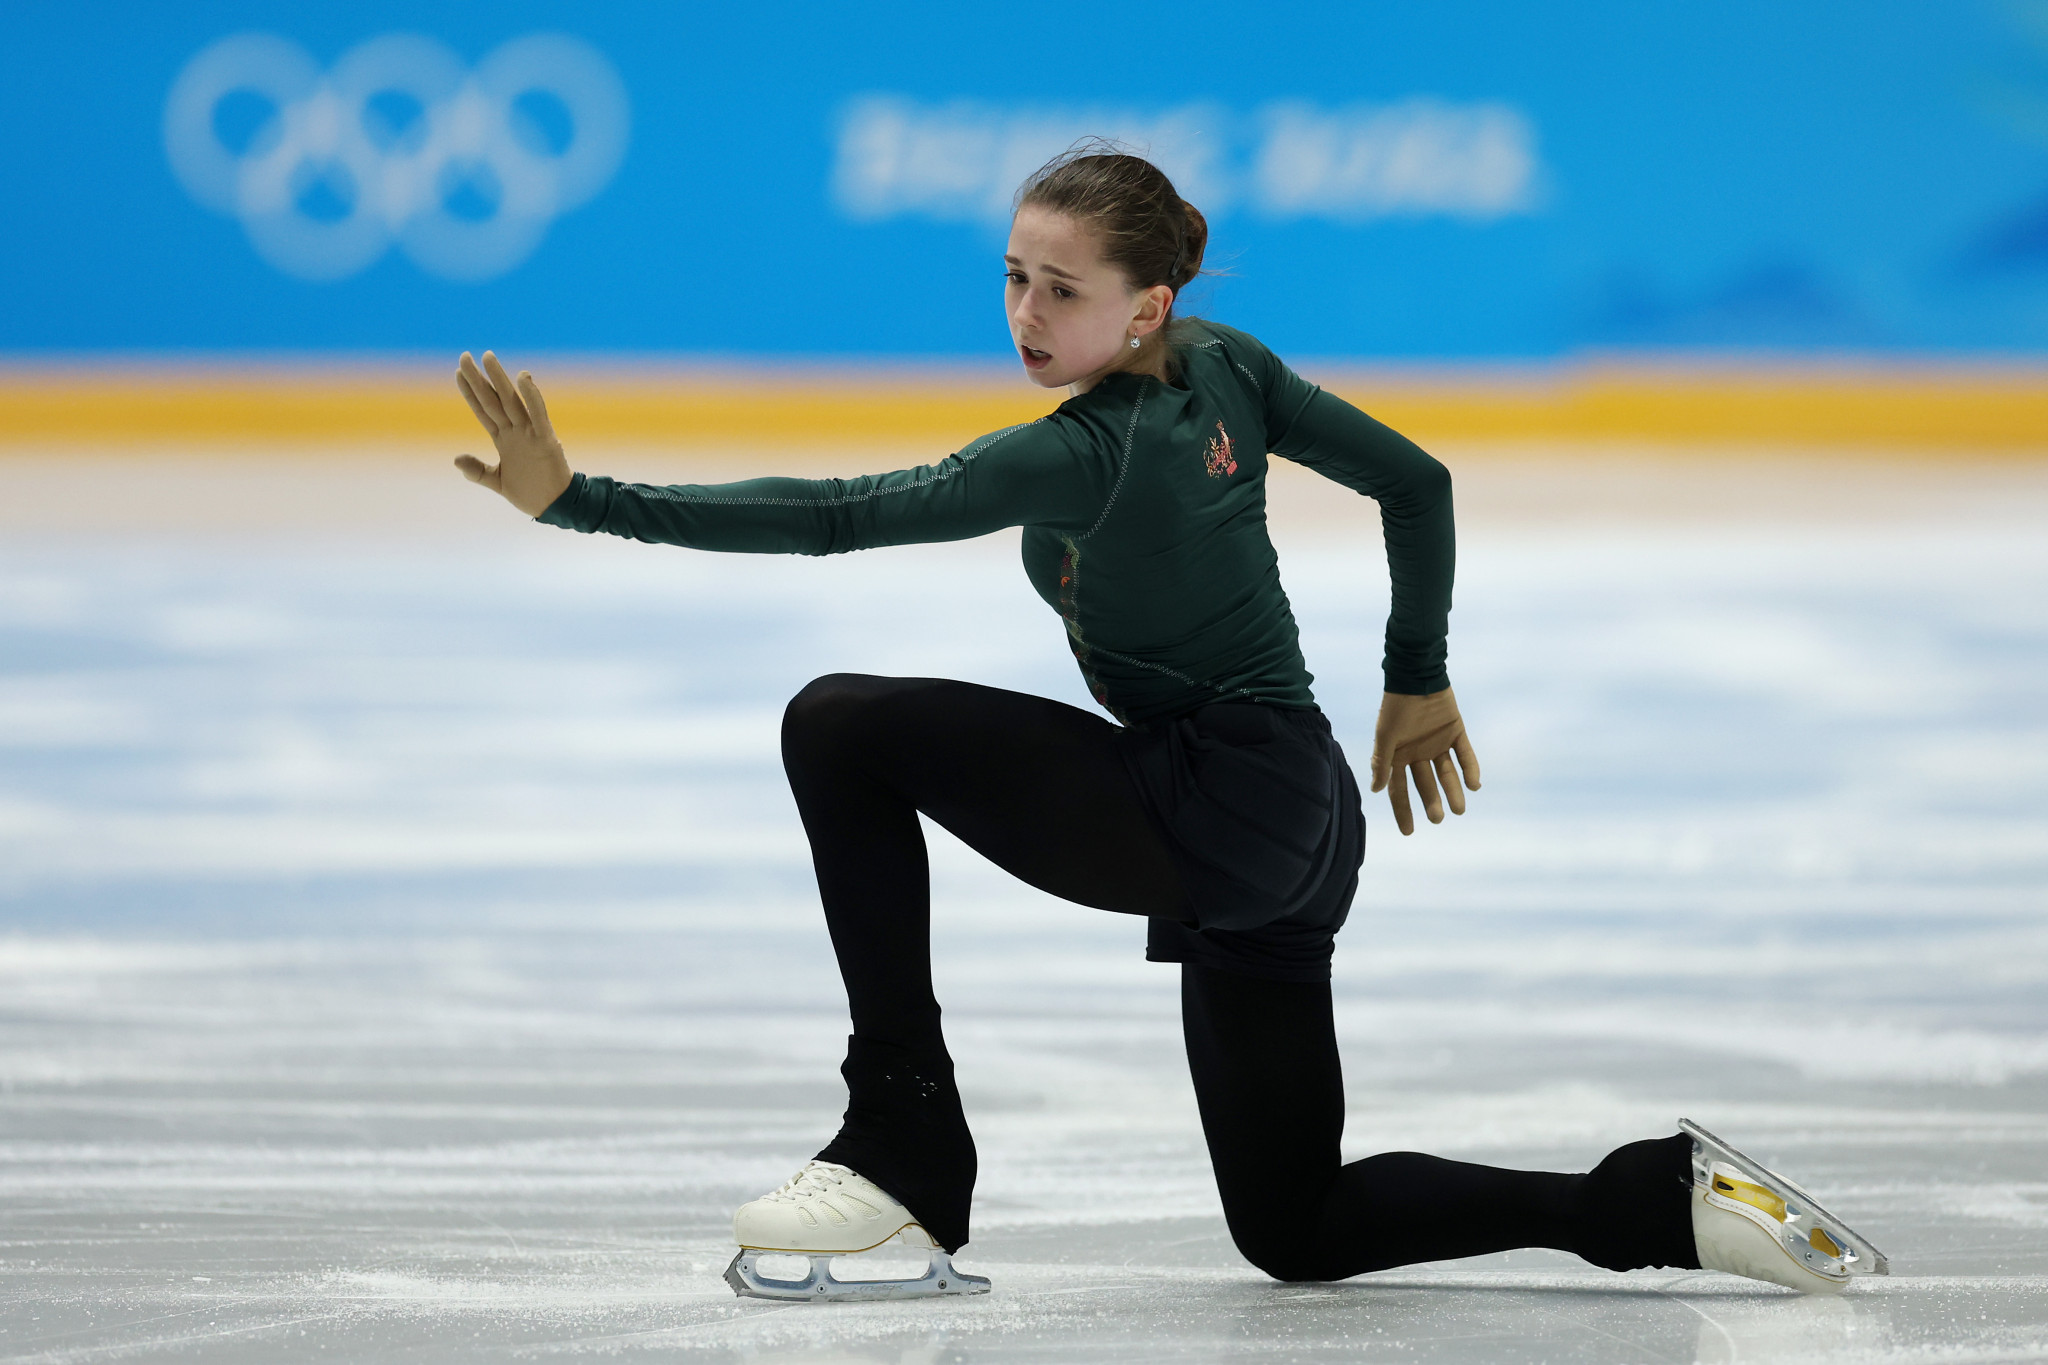 Kamila Valieva of the Russian Olympic Committee continued to train despite the doping controversy that surrounds the figure skater ©Getty Images